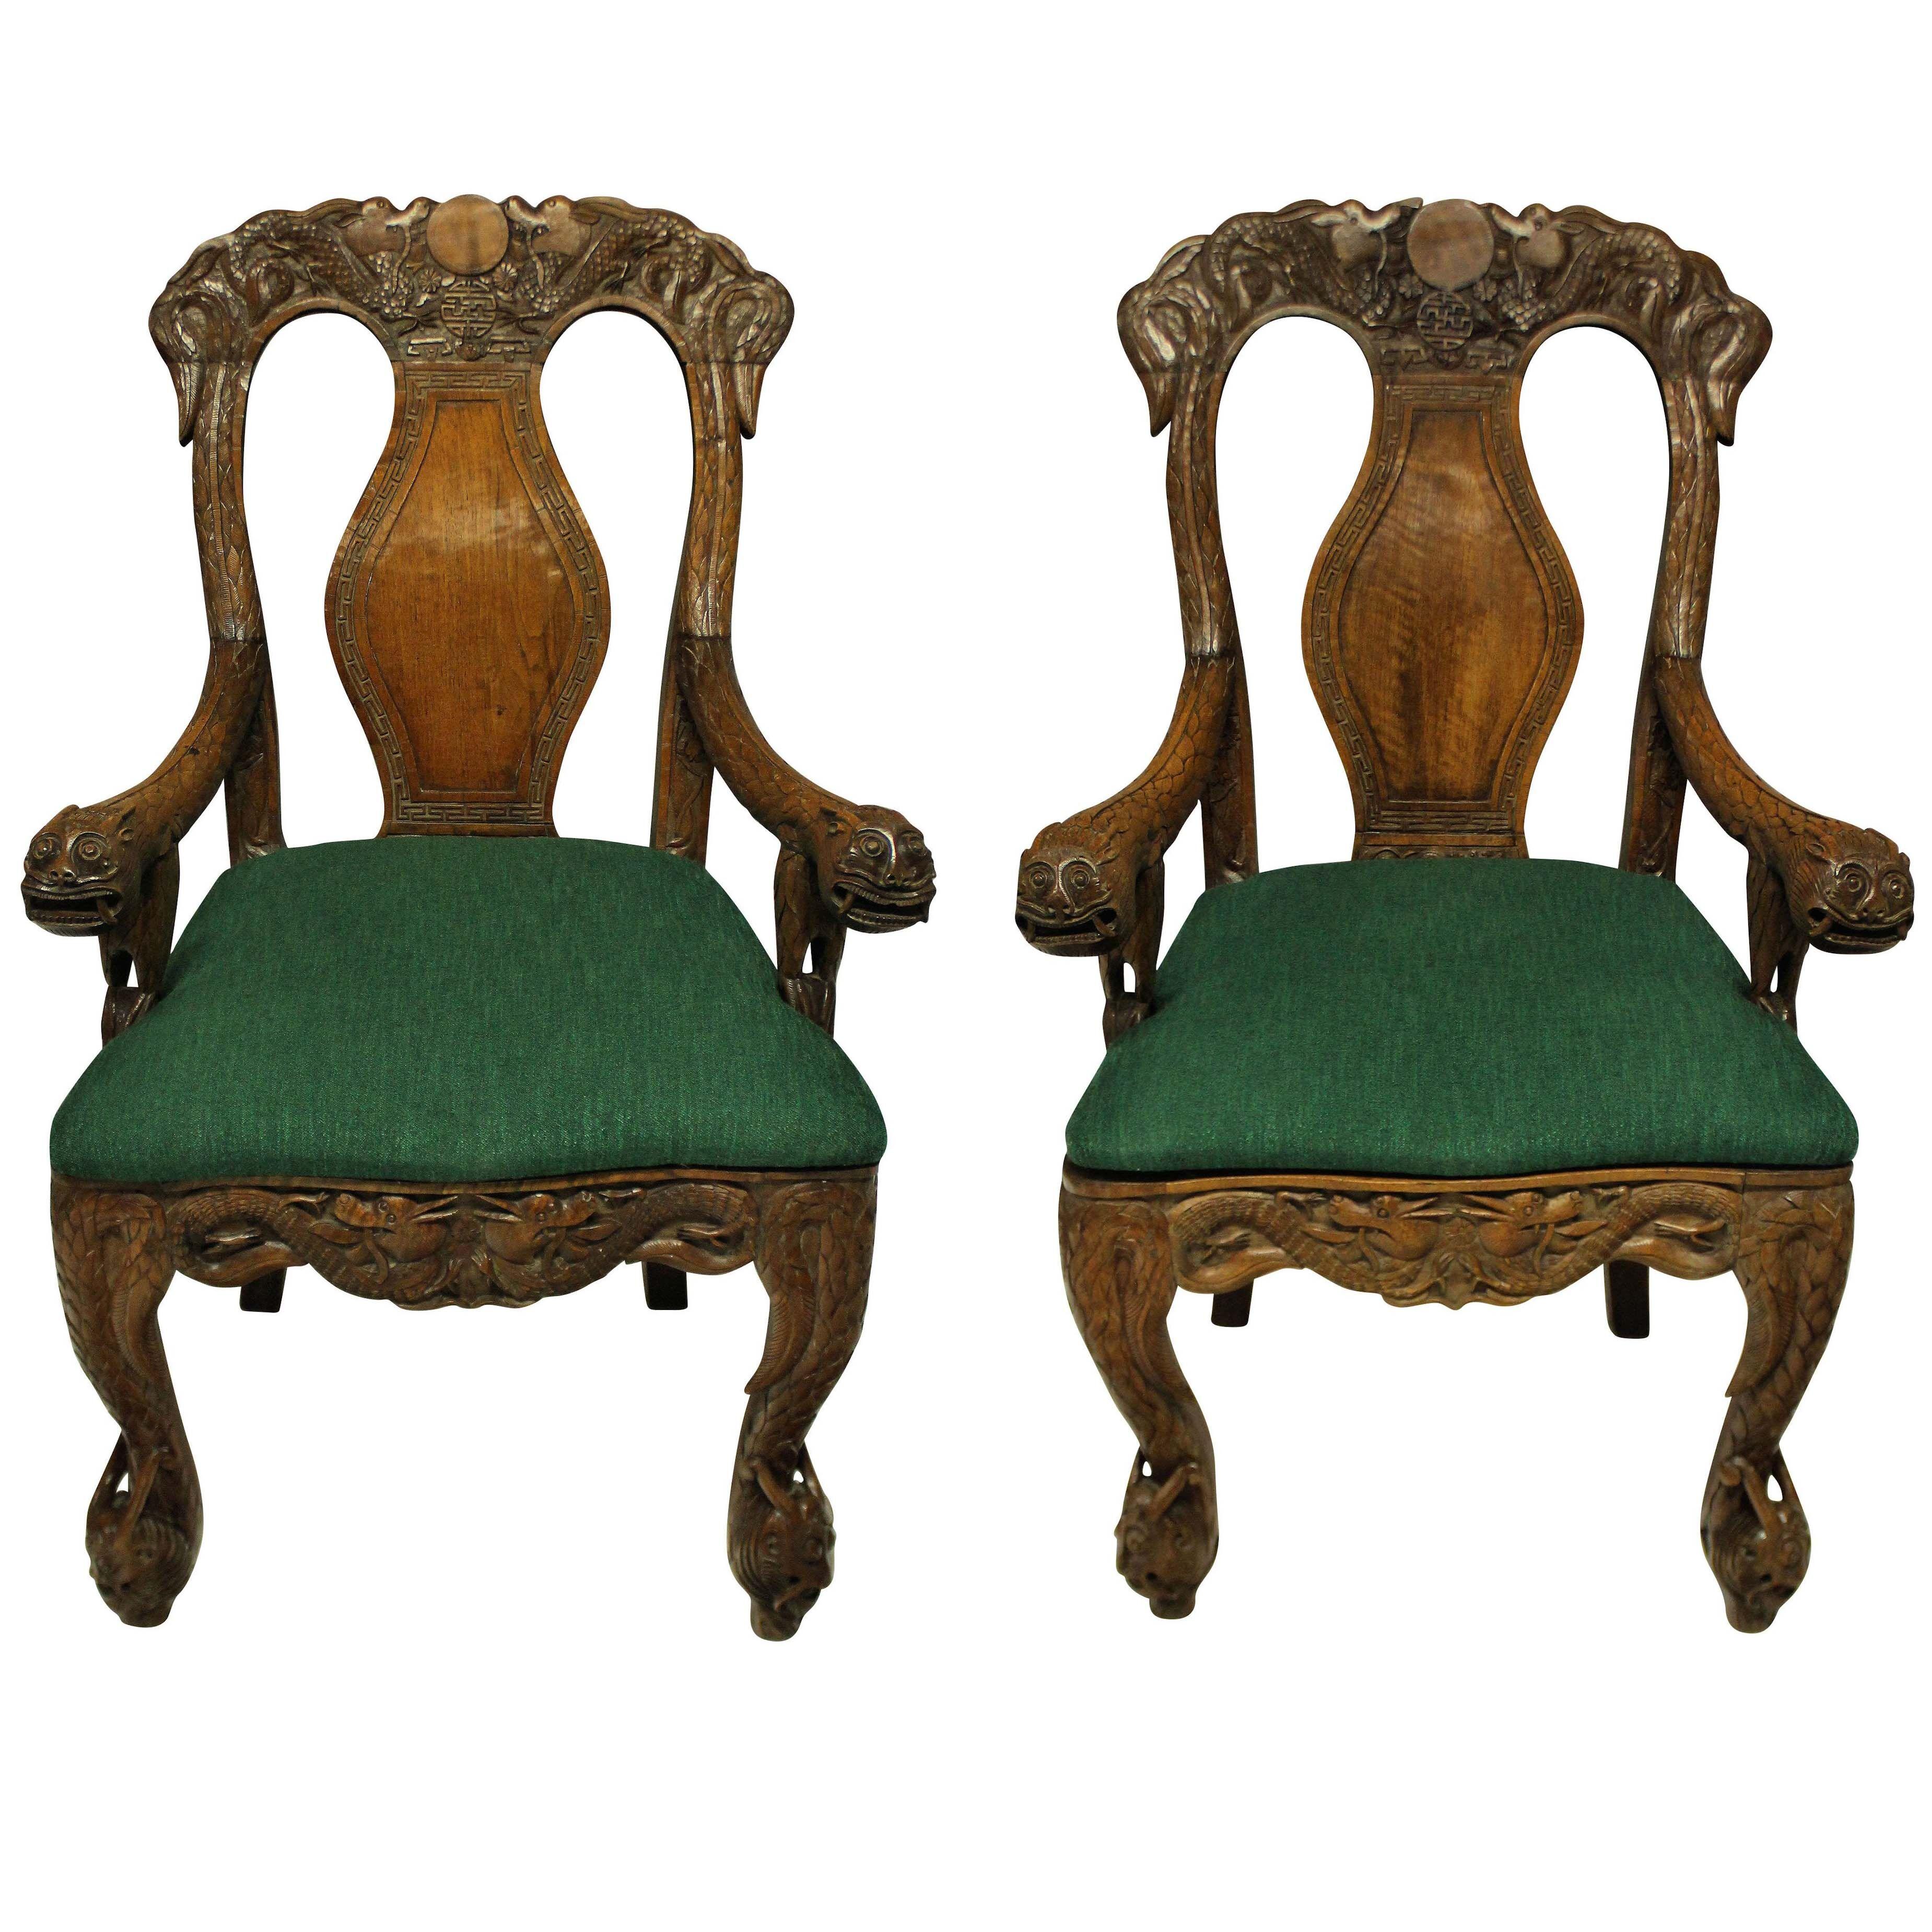 A PAIR OF FINELY CARVED XIX CENTURY CHINESE ARMCHAIRS